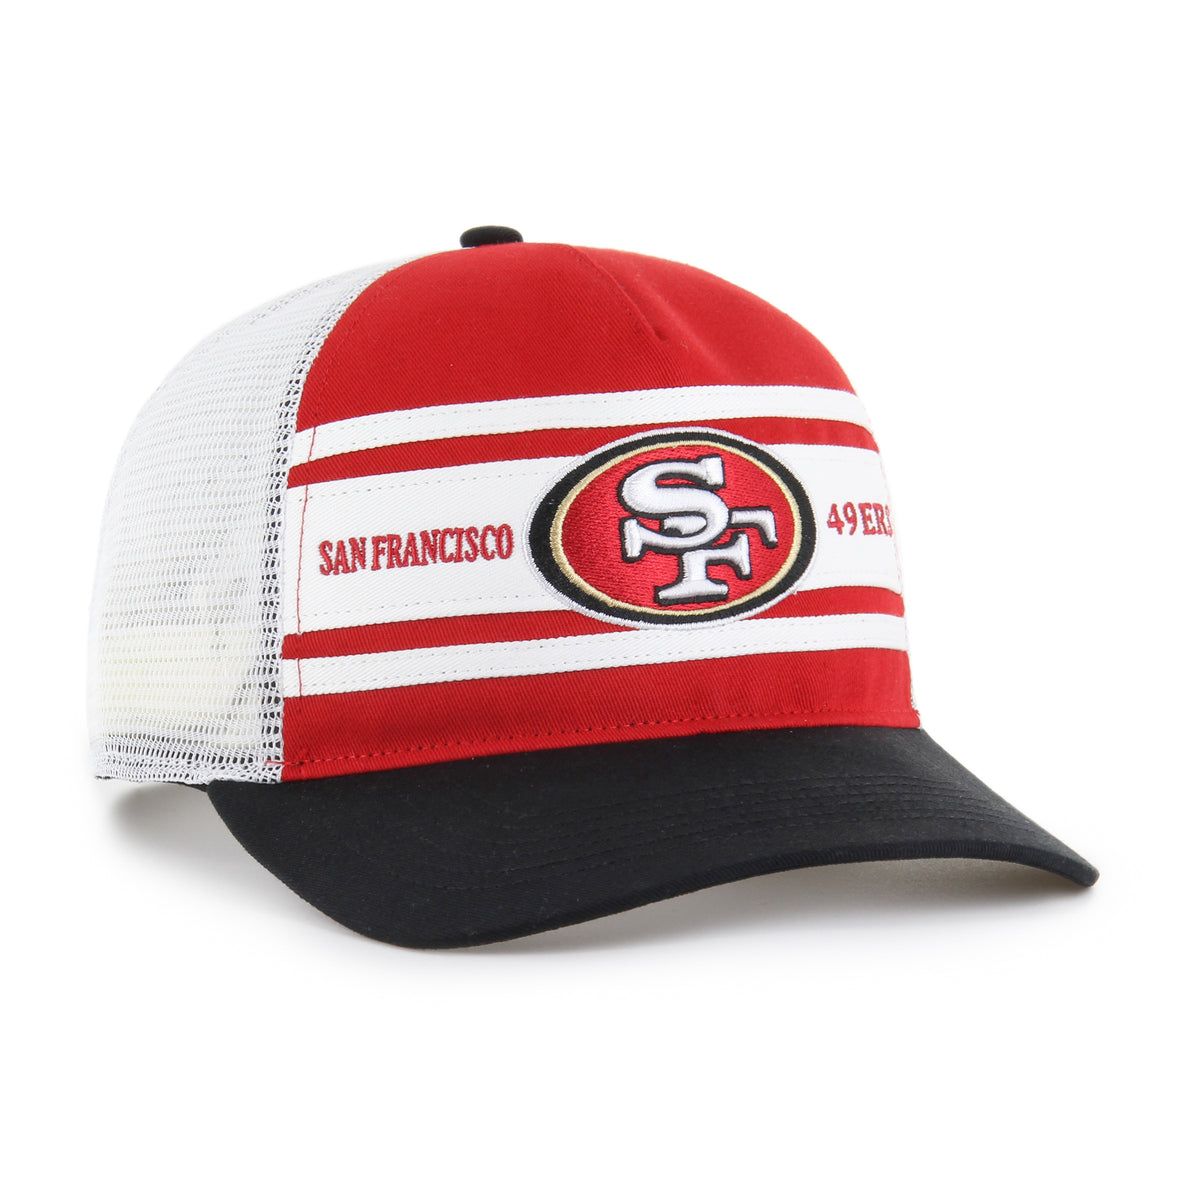 SAN FRANCISCO 49ERS GRIDIRON SUPER STRIPE '47 HITCH RELAXED FIT